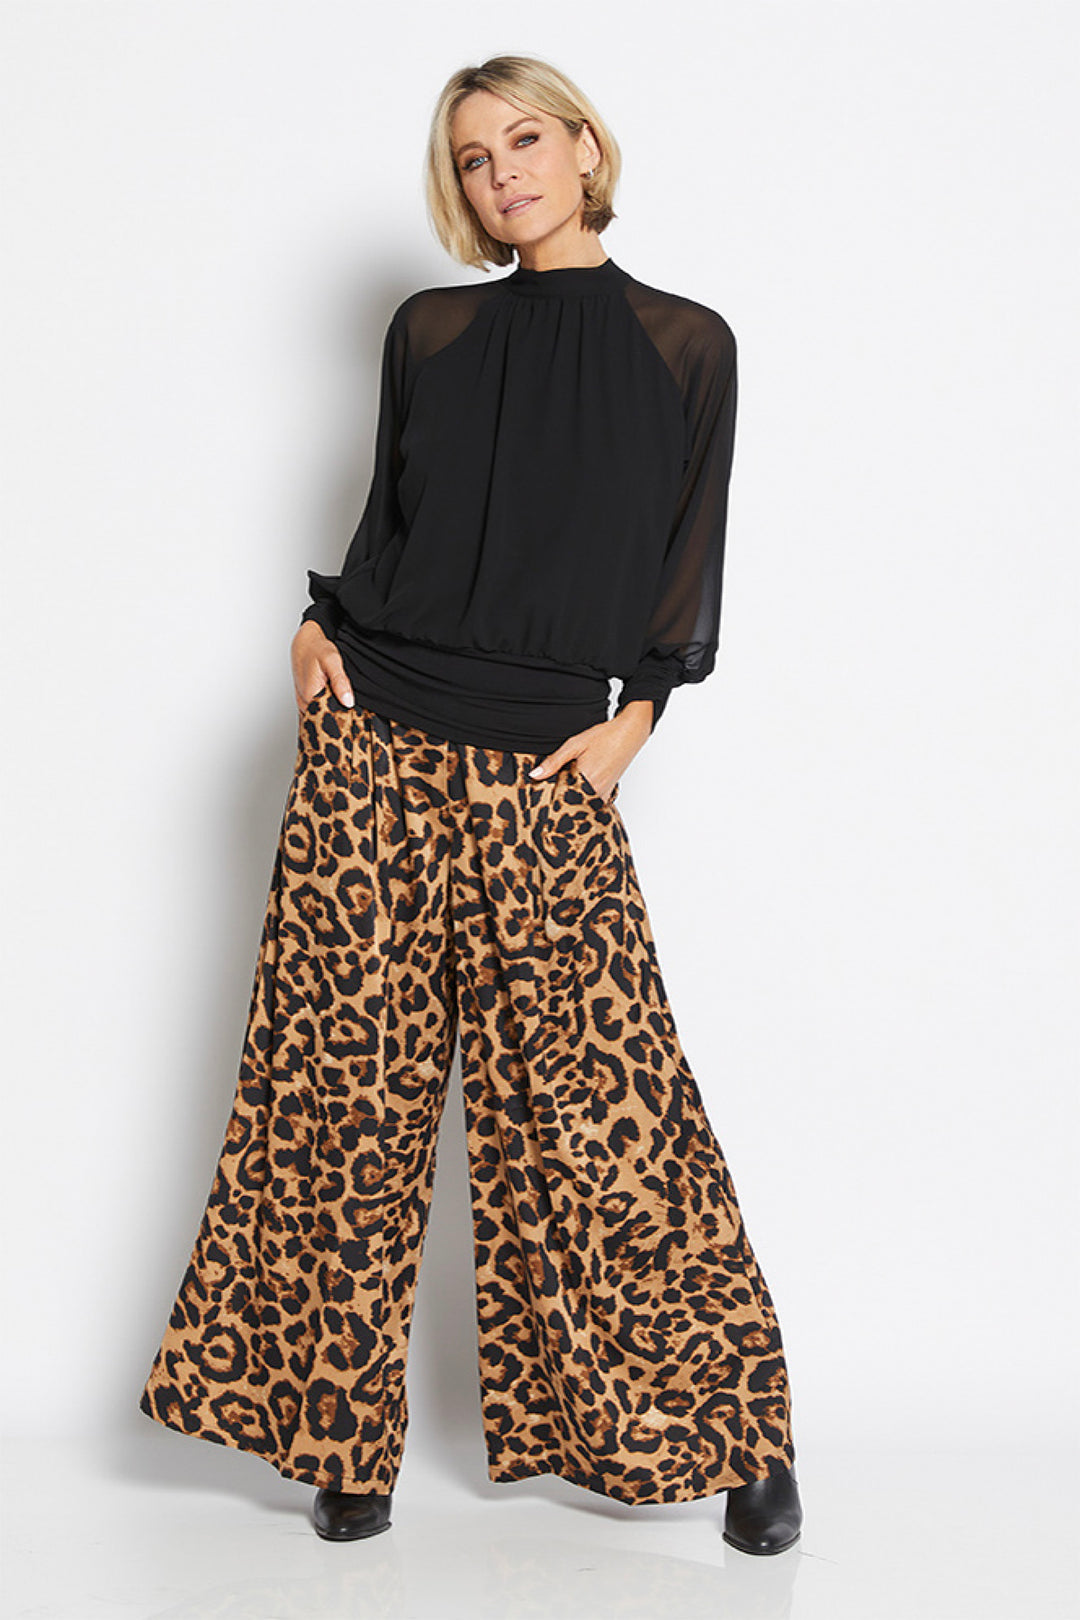 Francine extra wide leg pant in tan & black animal print by Philosophy Australia.  Polyester fabric, side pockets, elastic waistband, two front pleats from waist.